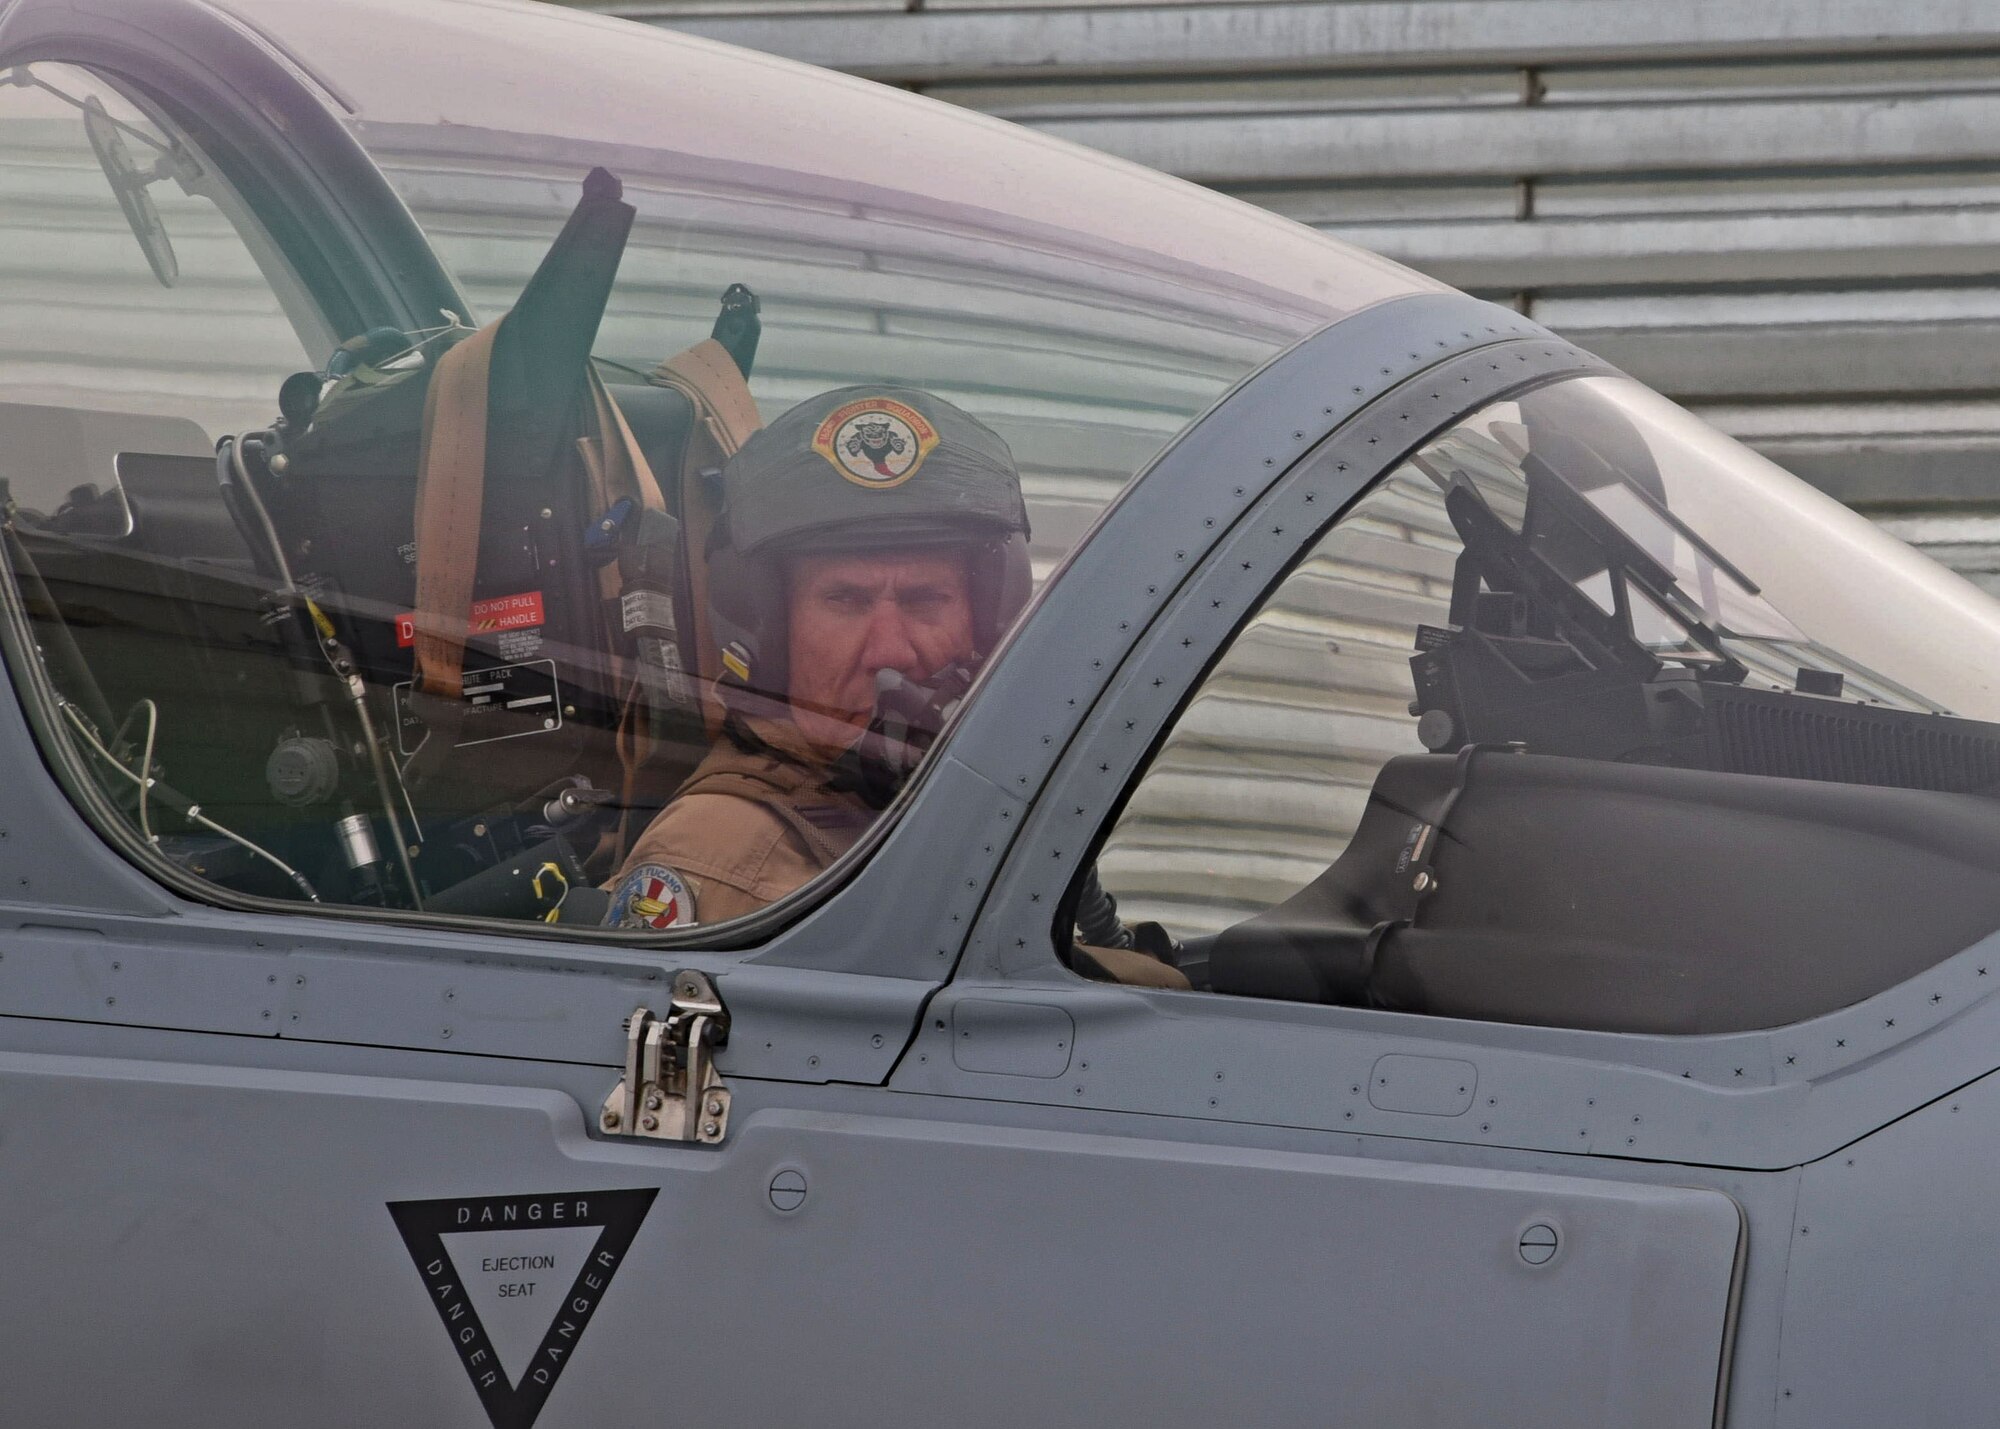 An Afghan Air Force crew chief marshals in one of four A-29 Super Tucano light-attack aircraft arriving for duty at Kabul Air Wing, Kabul, Afghanistan, March 20, 2017. The A-29s will be used by the Afghan Air Force for close-air attack, air interdiction, escort and armed reconnaissance. These latest arrivals, which traveled from Moody Air Force Base, Ga., bring the AAF A-29 inventory from eight to 12 aircraft in country. (U.S. Air Force photo by Tech. Sgt. Veronica Pierce)